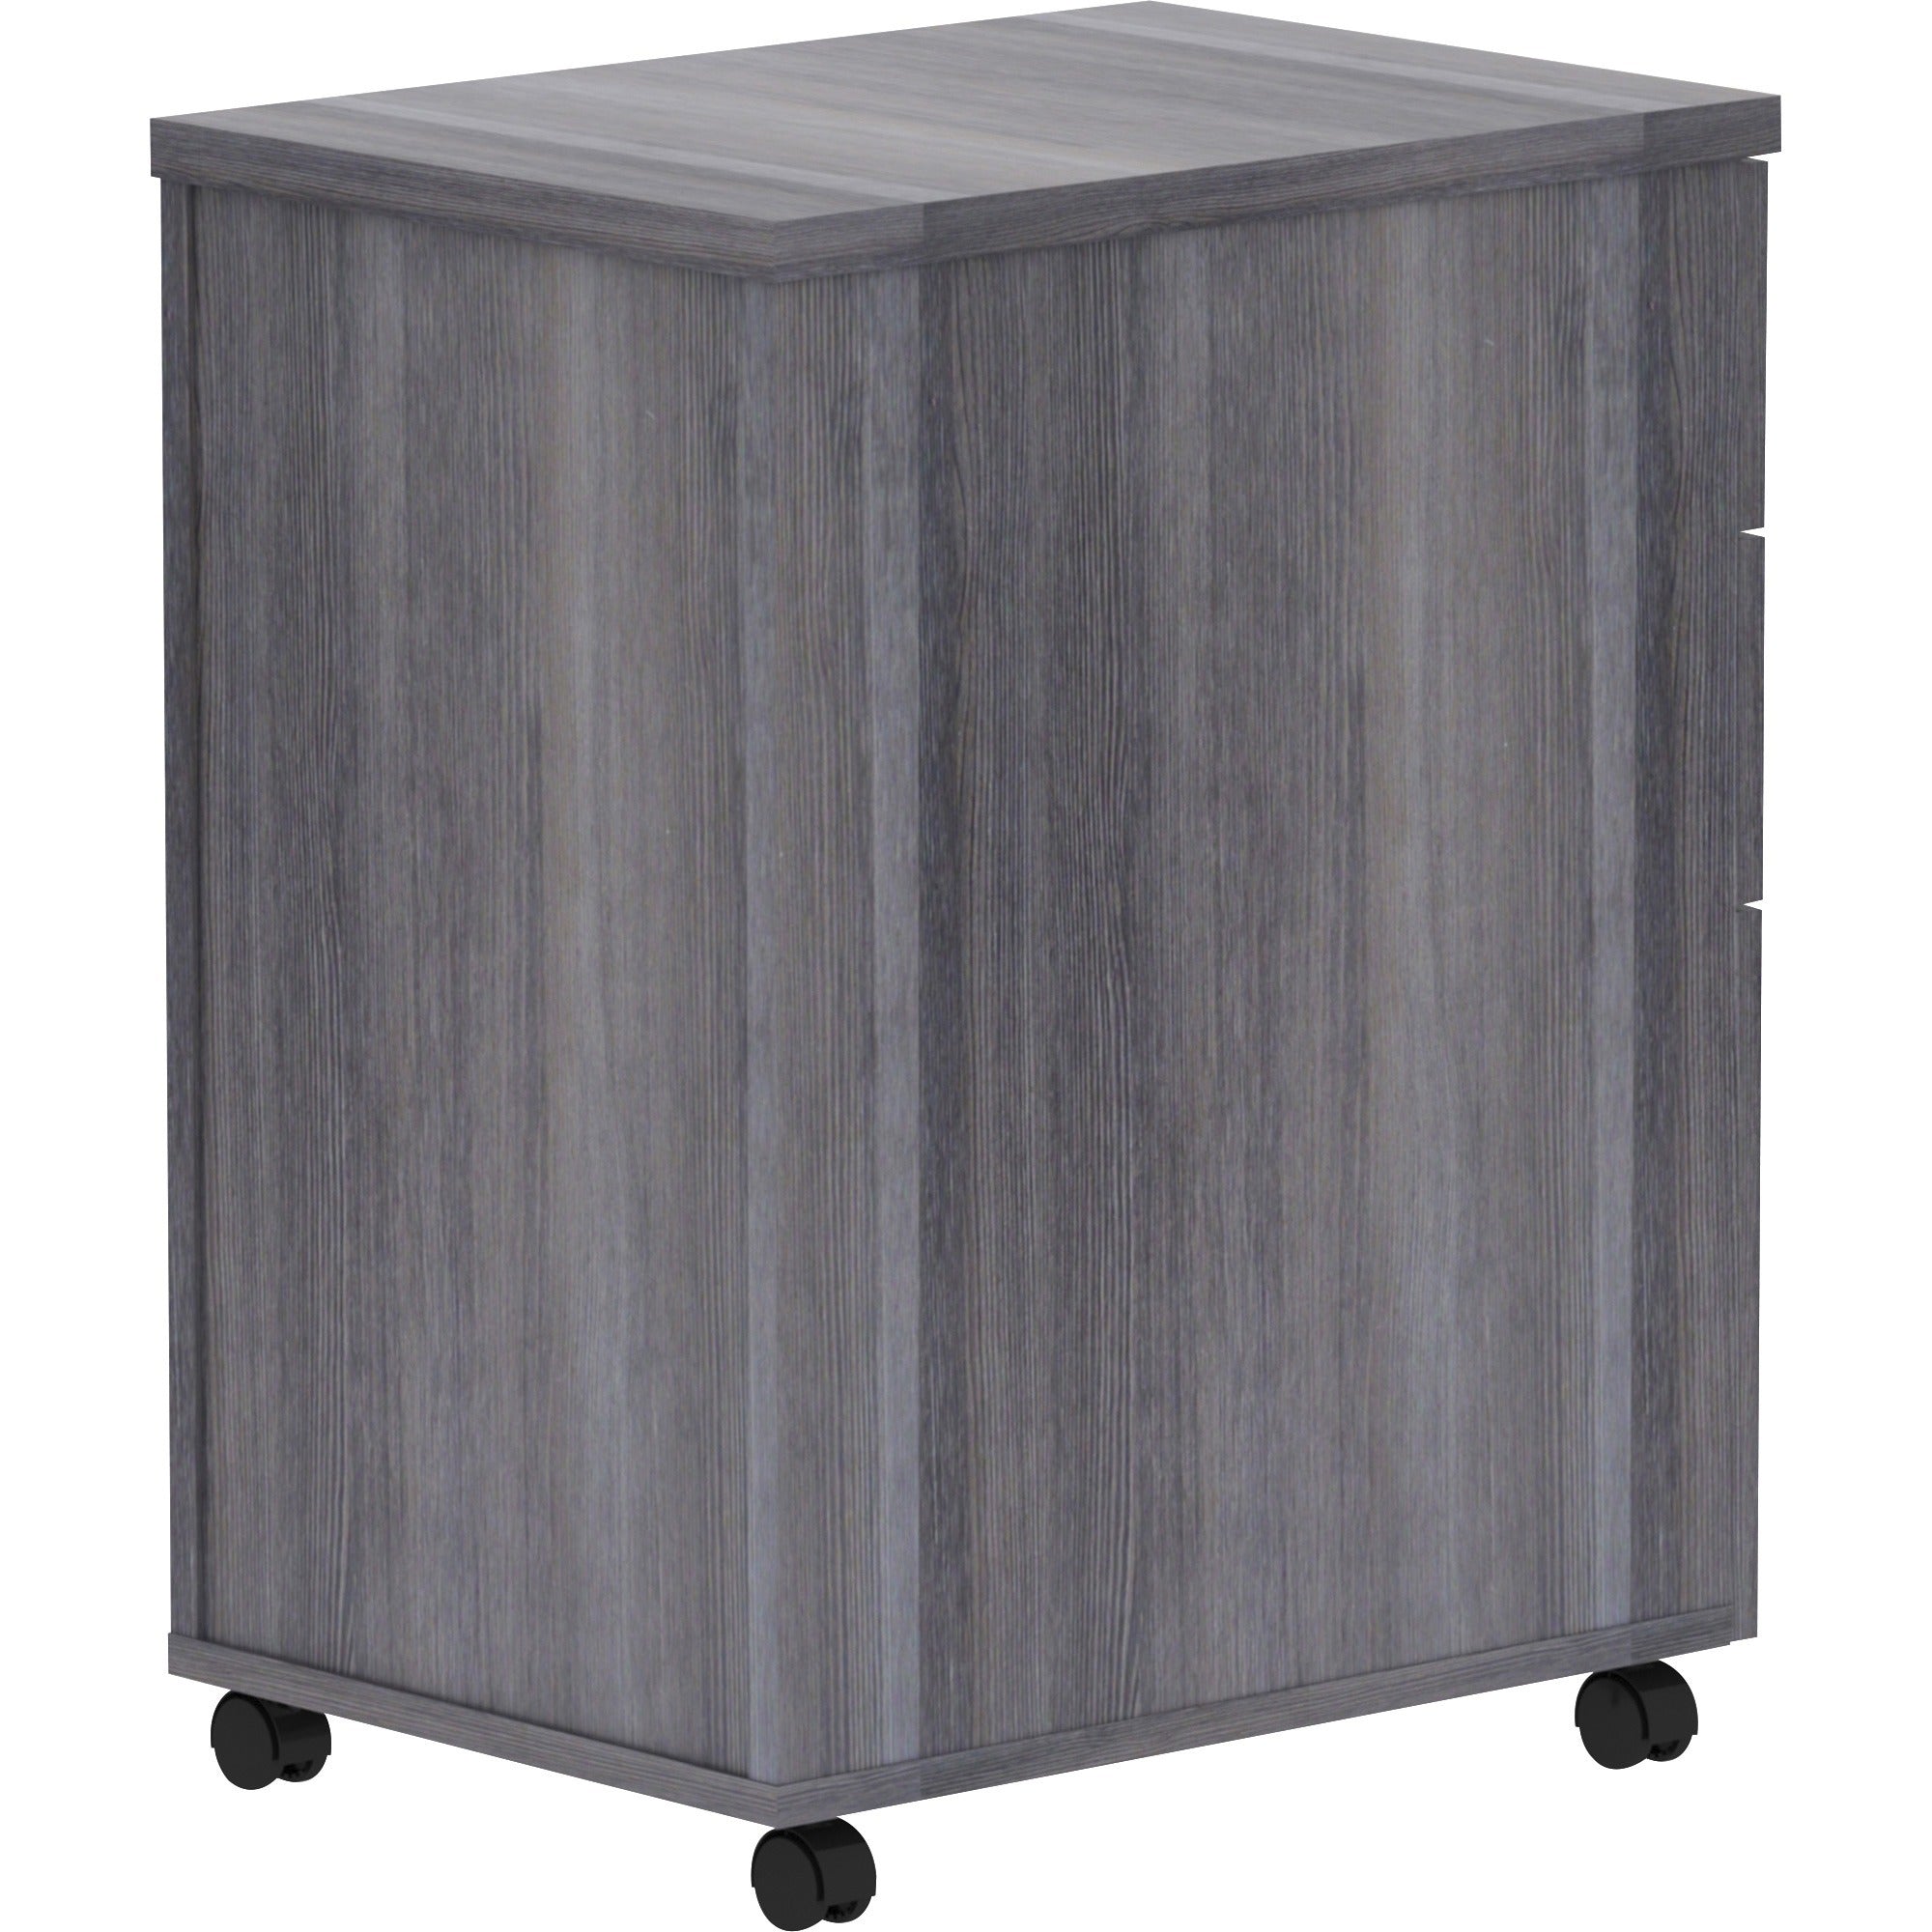 lorell-essentials-series-box-box-file-mobile-file-cabinet-16-x-22283-3-x-box-file-drawers-finish-weathered-charcoal-laminate_llr69560 - 4